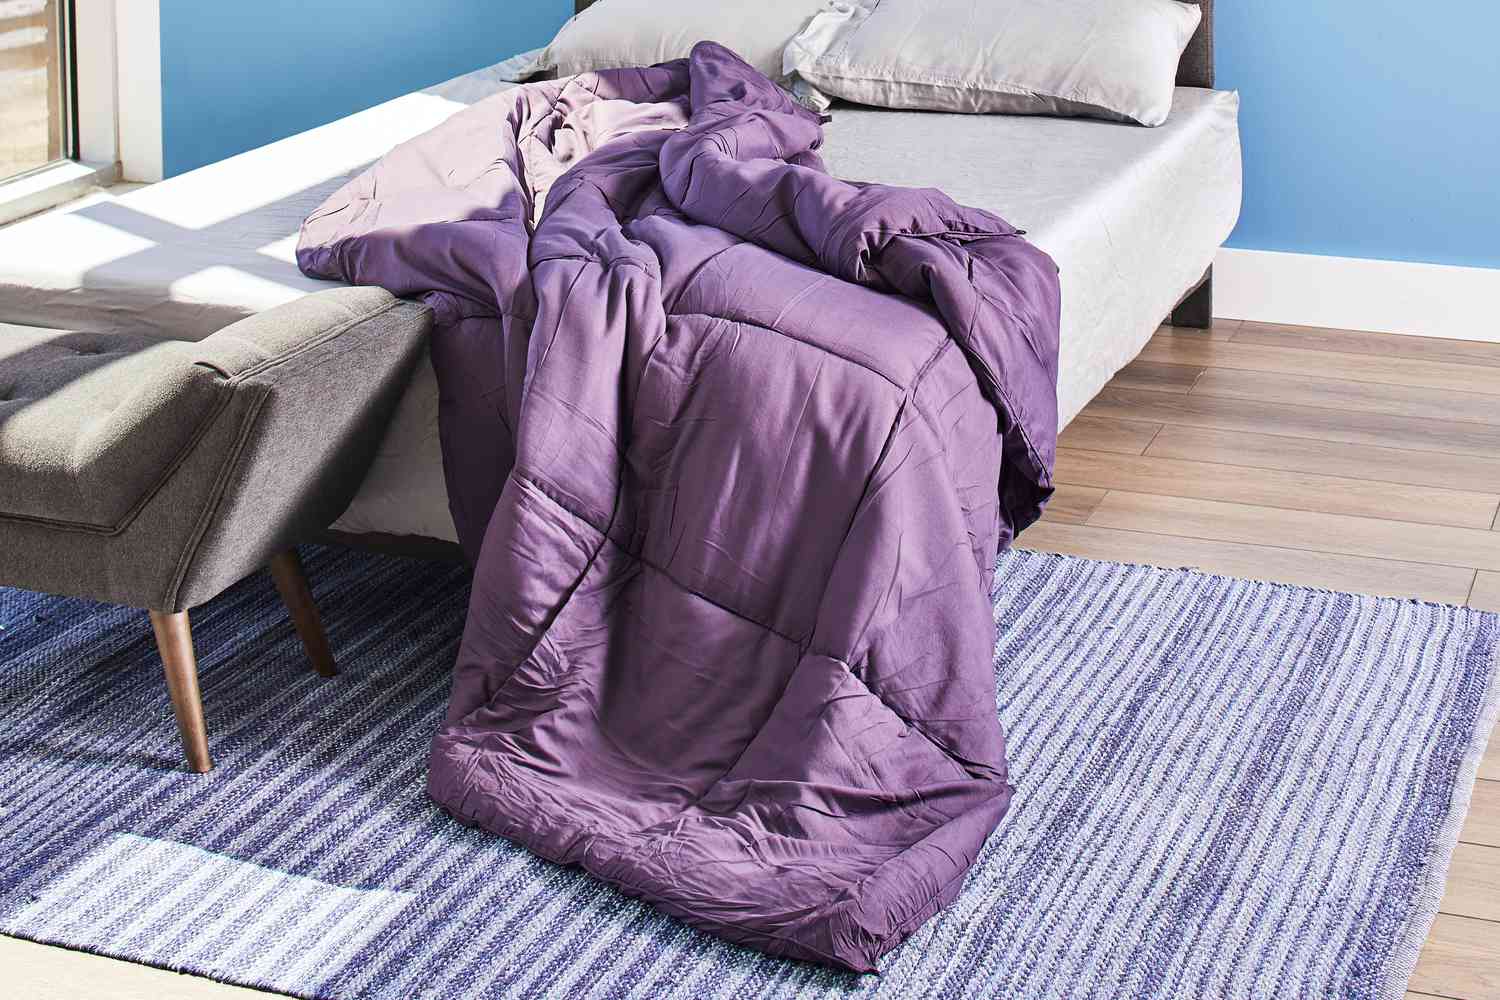 Which Duvet Cover Material Is The Best